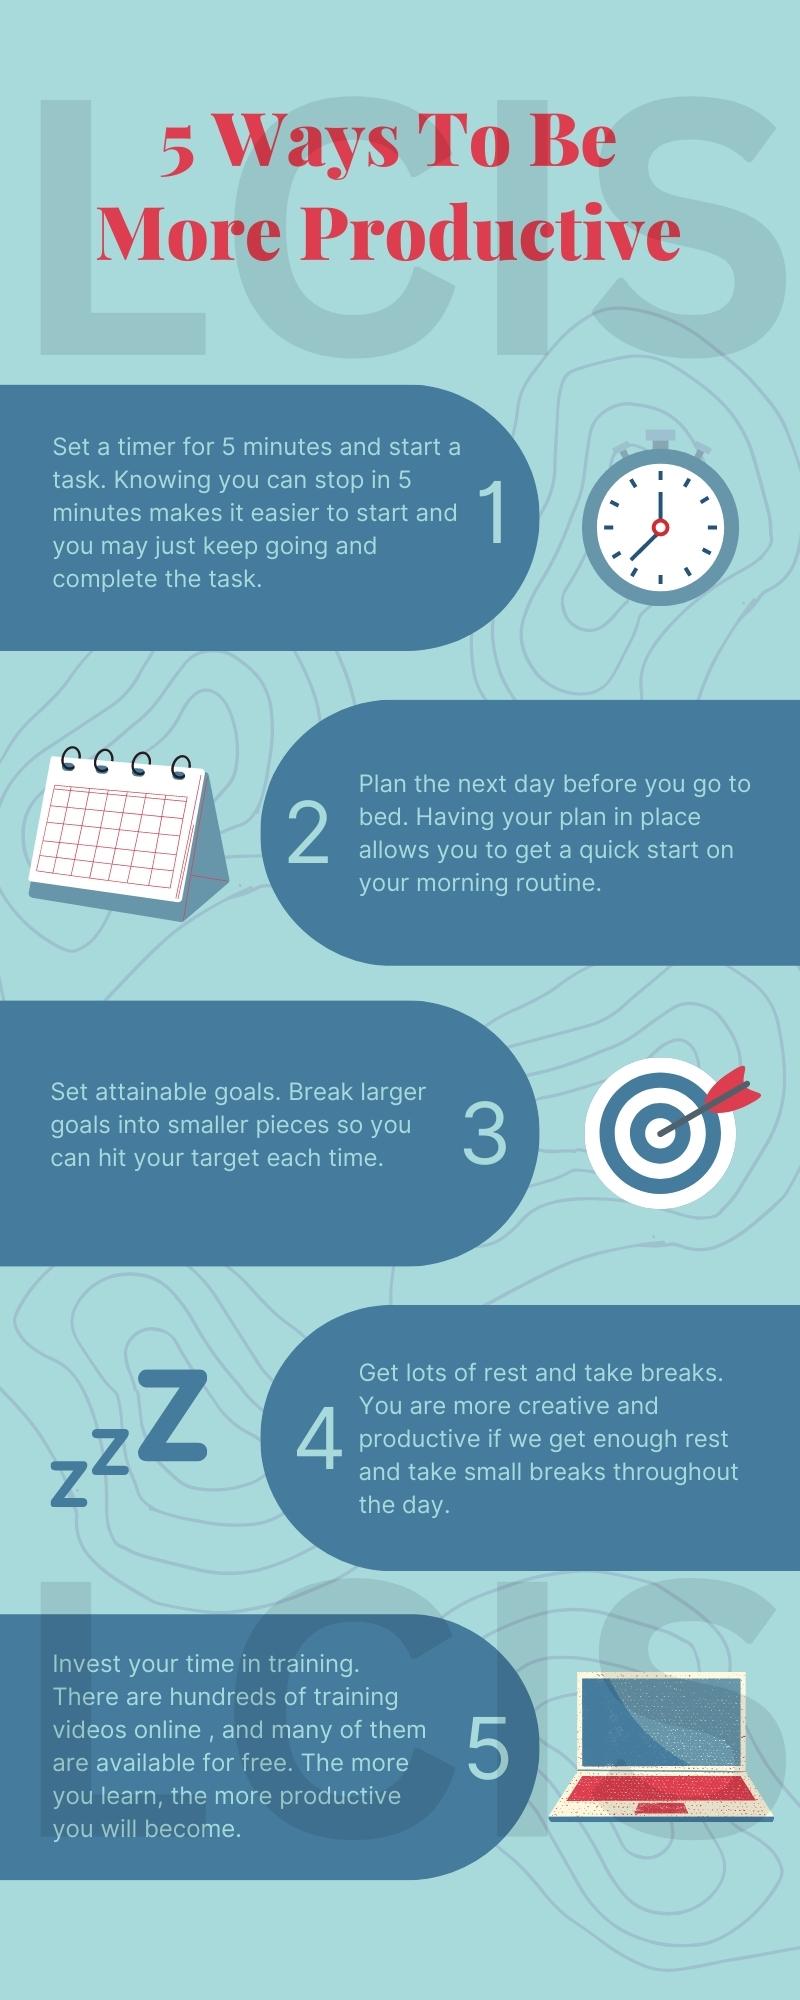 5 Ways To Be
More Productive